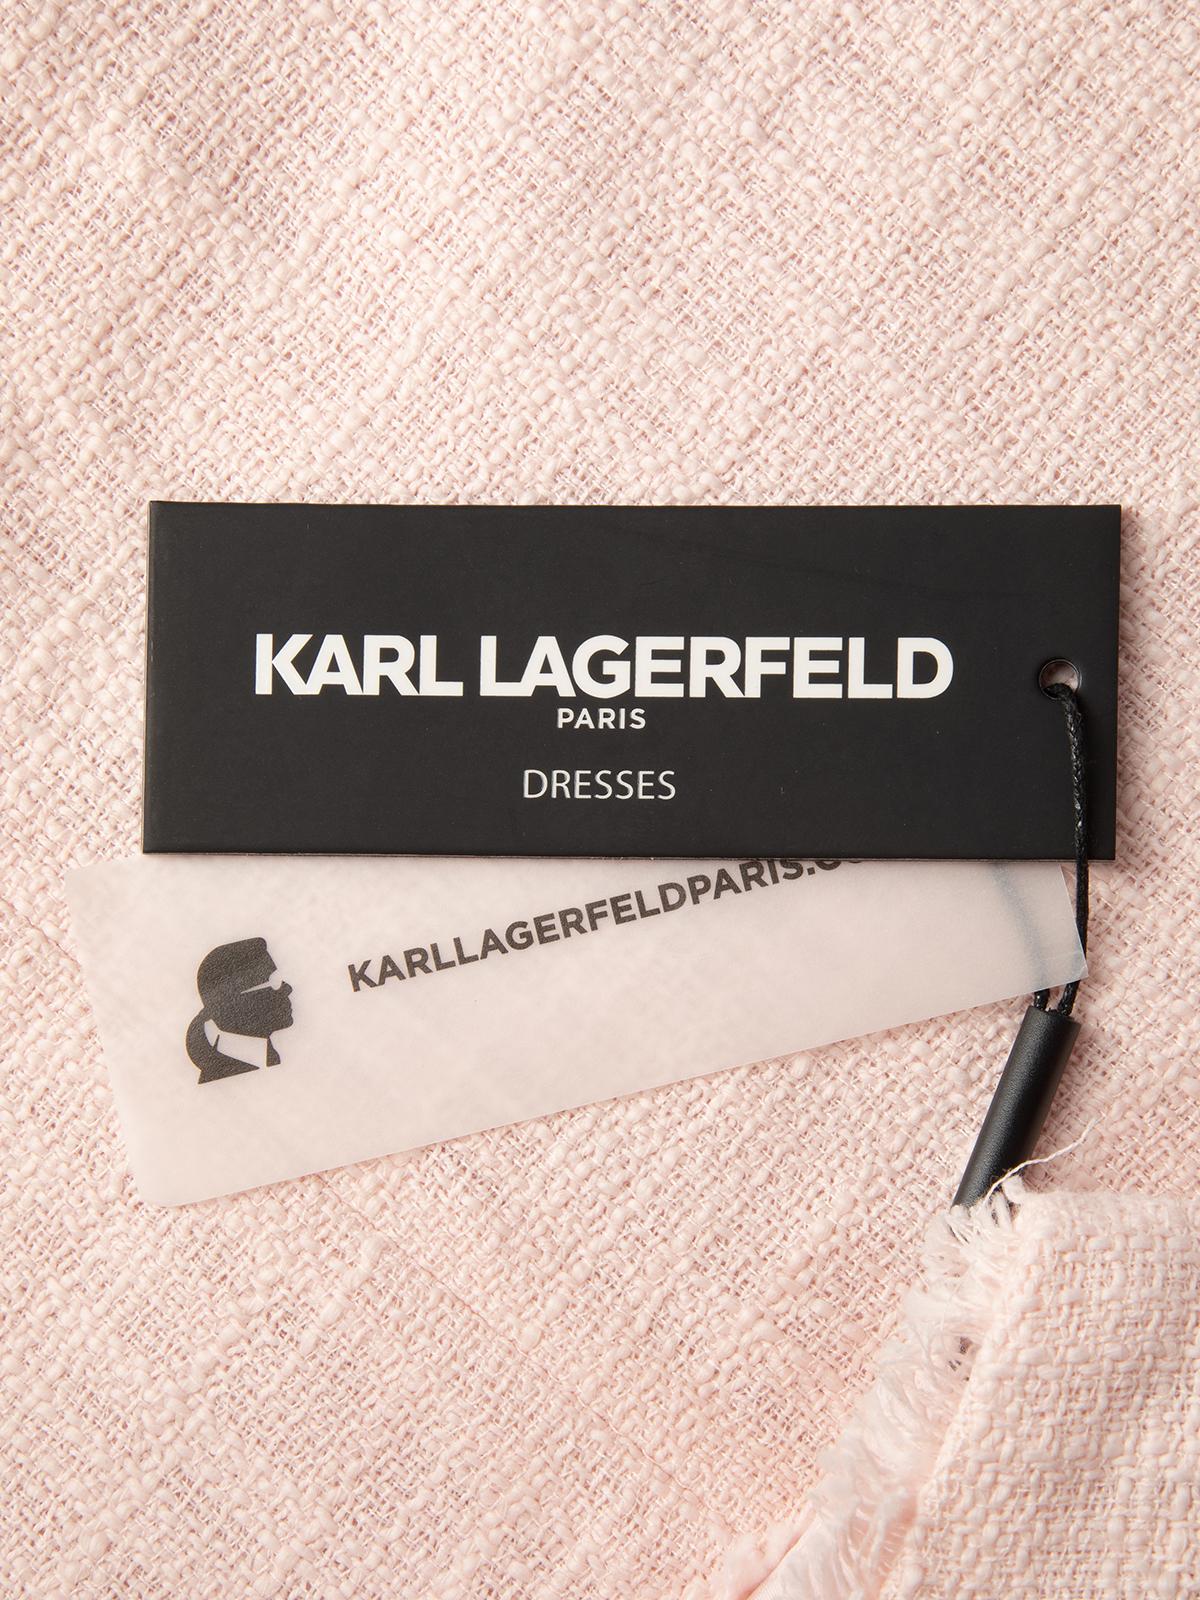 Karl Lagerfeld Women's Tweed Dress In Excellent Condition For Sale In London, GB